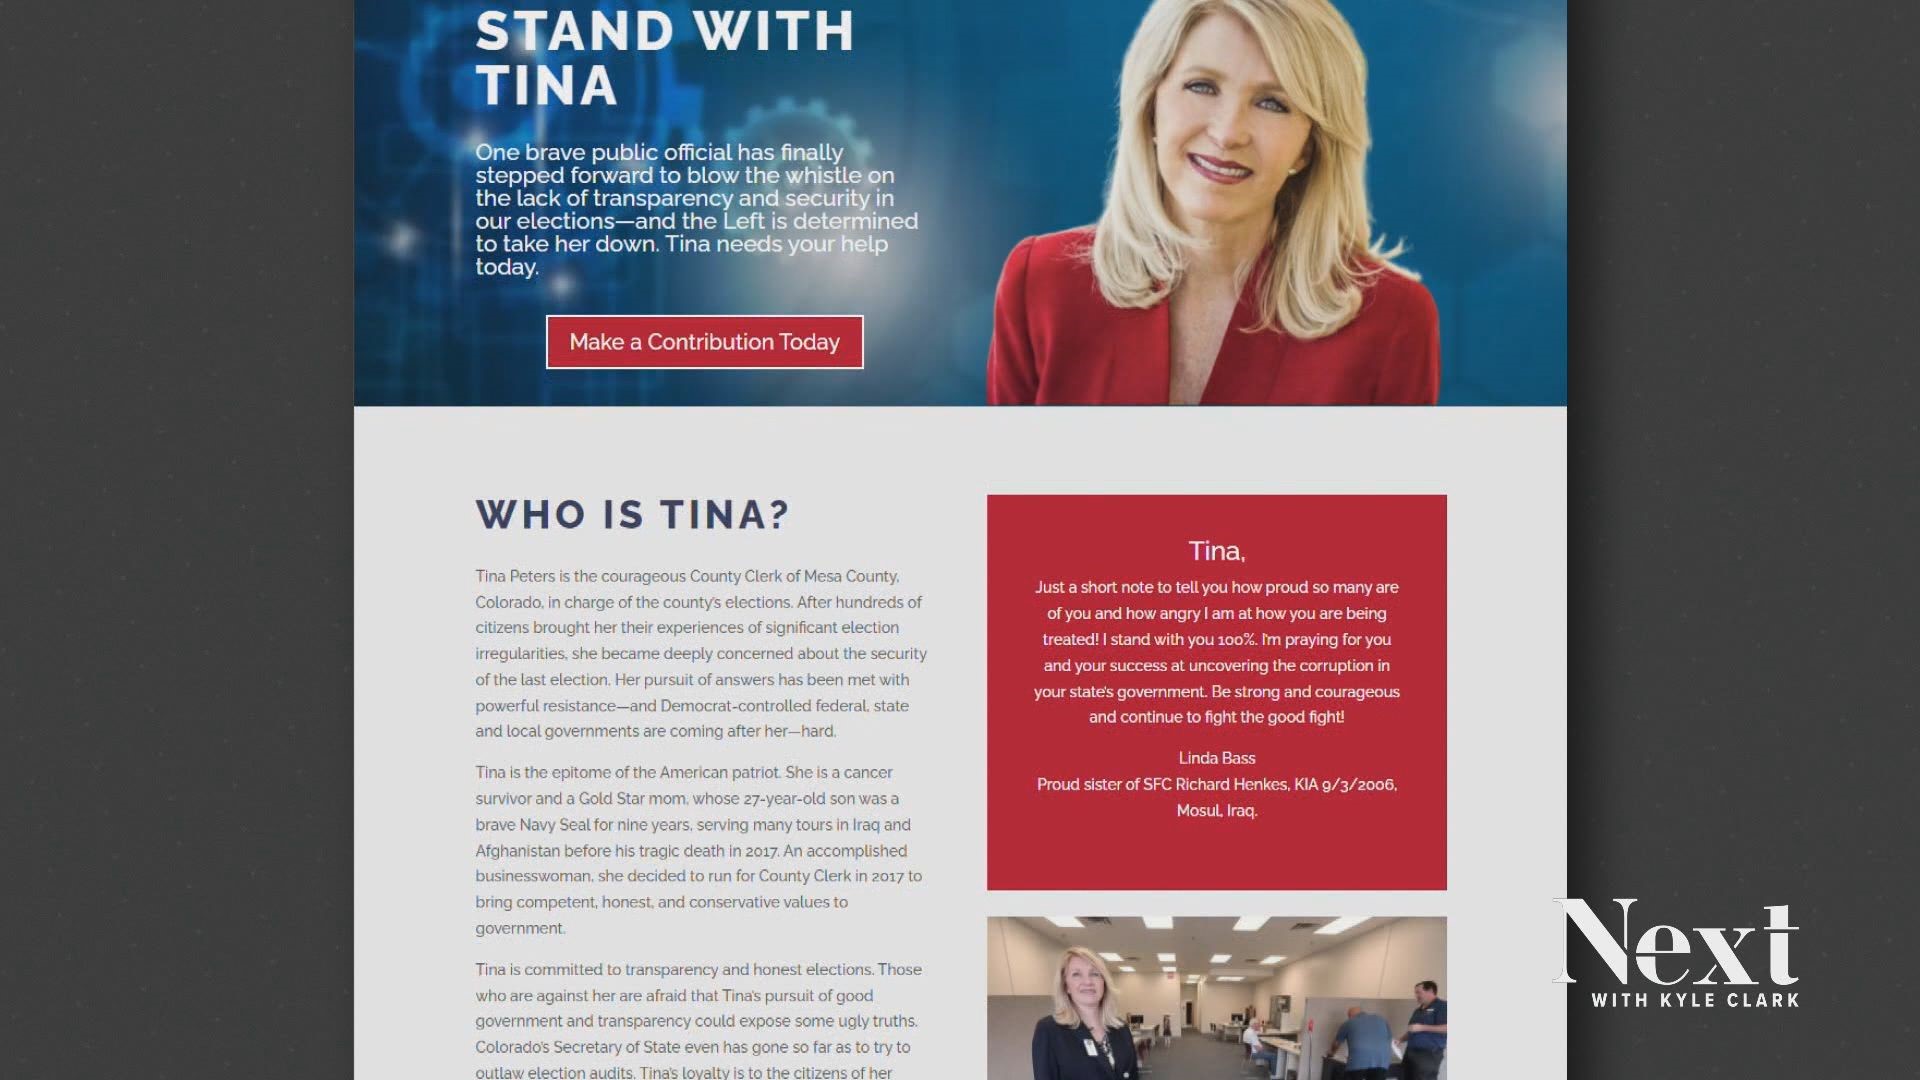 Indicted Mesa County Clerk and Secretary of State candidate Tina Peters is shifting her legal defense fundraising to Wisconsin as she faces ethics investigation.